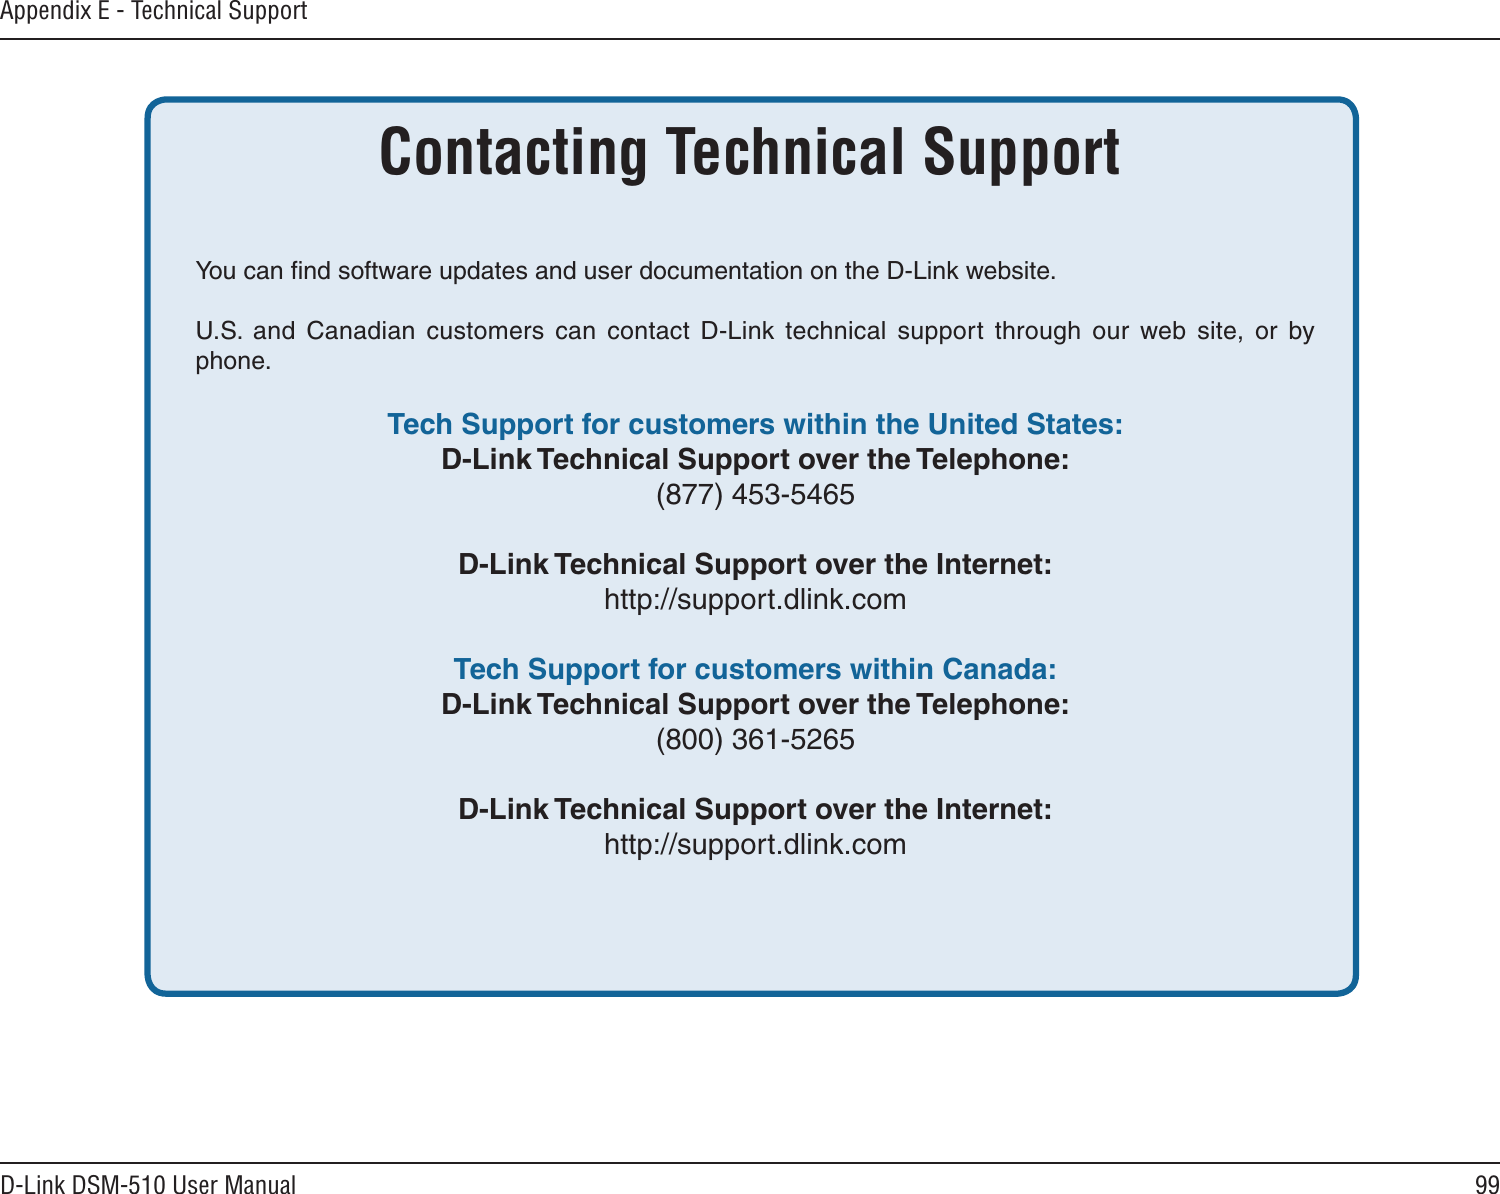 99D-Link DSM-510 User ManualAppendix E - Technical SupportYou can ﬁnd software updates and user documentation on the D-Link website.U.S.  and  Canadian  customers  can  contact  D-Link  technical  support  through  our  web  site,  or  by phone.  Tech Support for customers within the United States: D-Link Technical Support over the Telephone:  (877) 453-5465  D-Link Technical Support over the Internet:  http://support.dlink.com Tech Support for customers within Canada: D-Link Technical Support over the Telephone:  (800) 361-5265    D-Link Technical Support over the Internet:  http://support.dlink.comContacting Technical Support